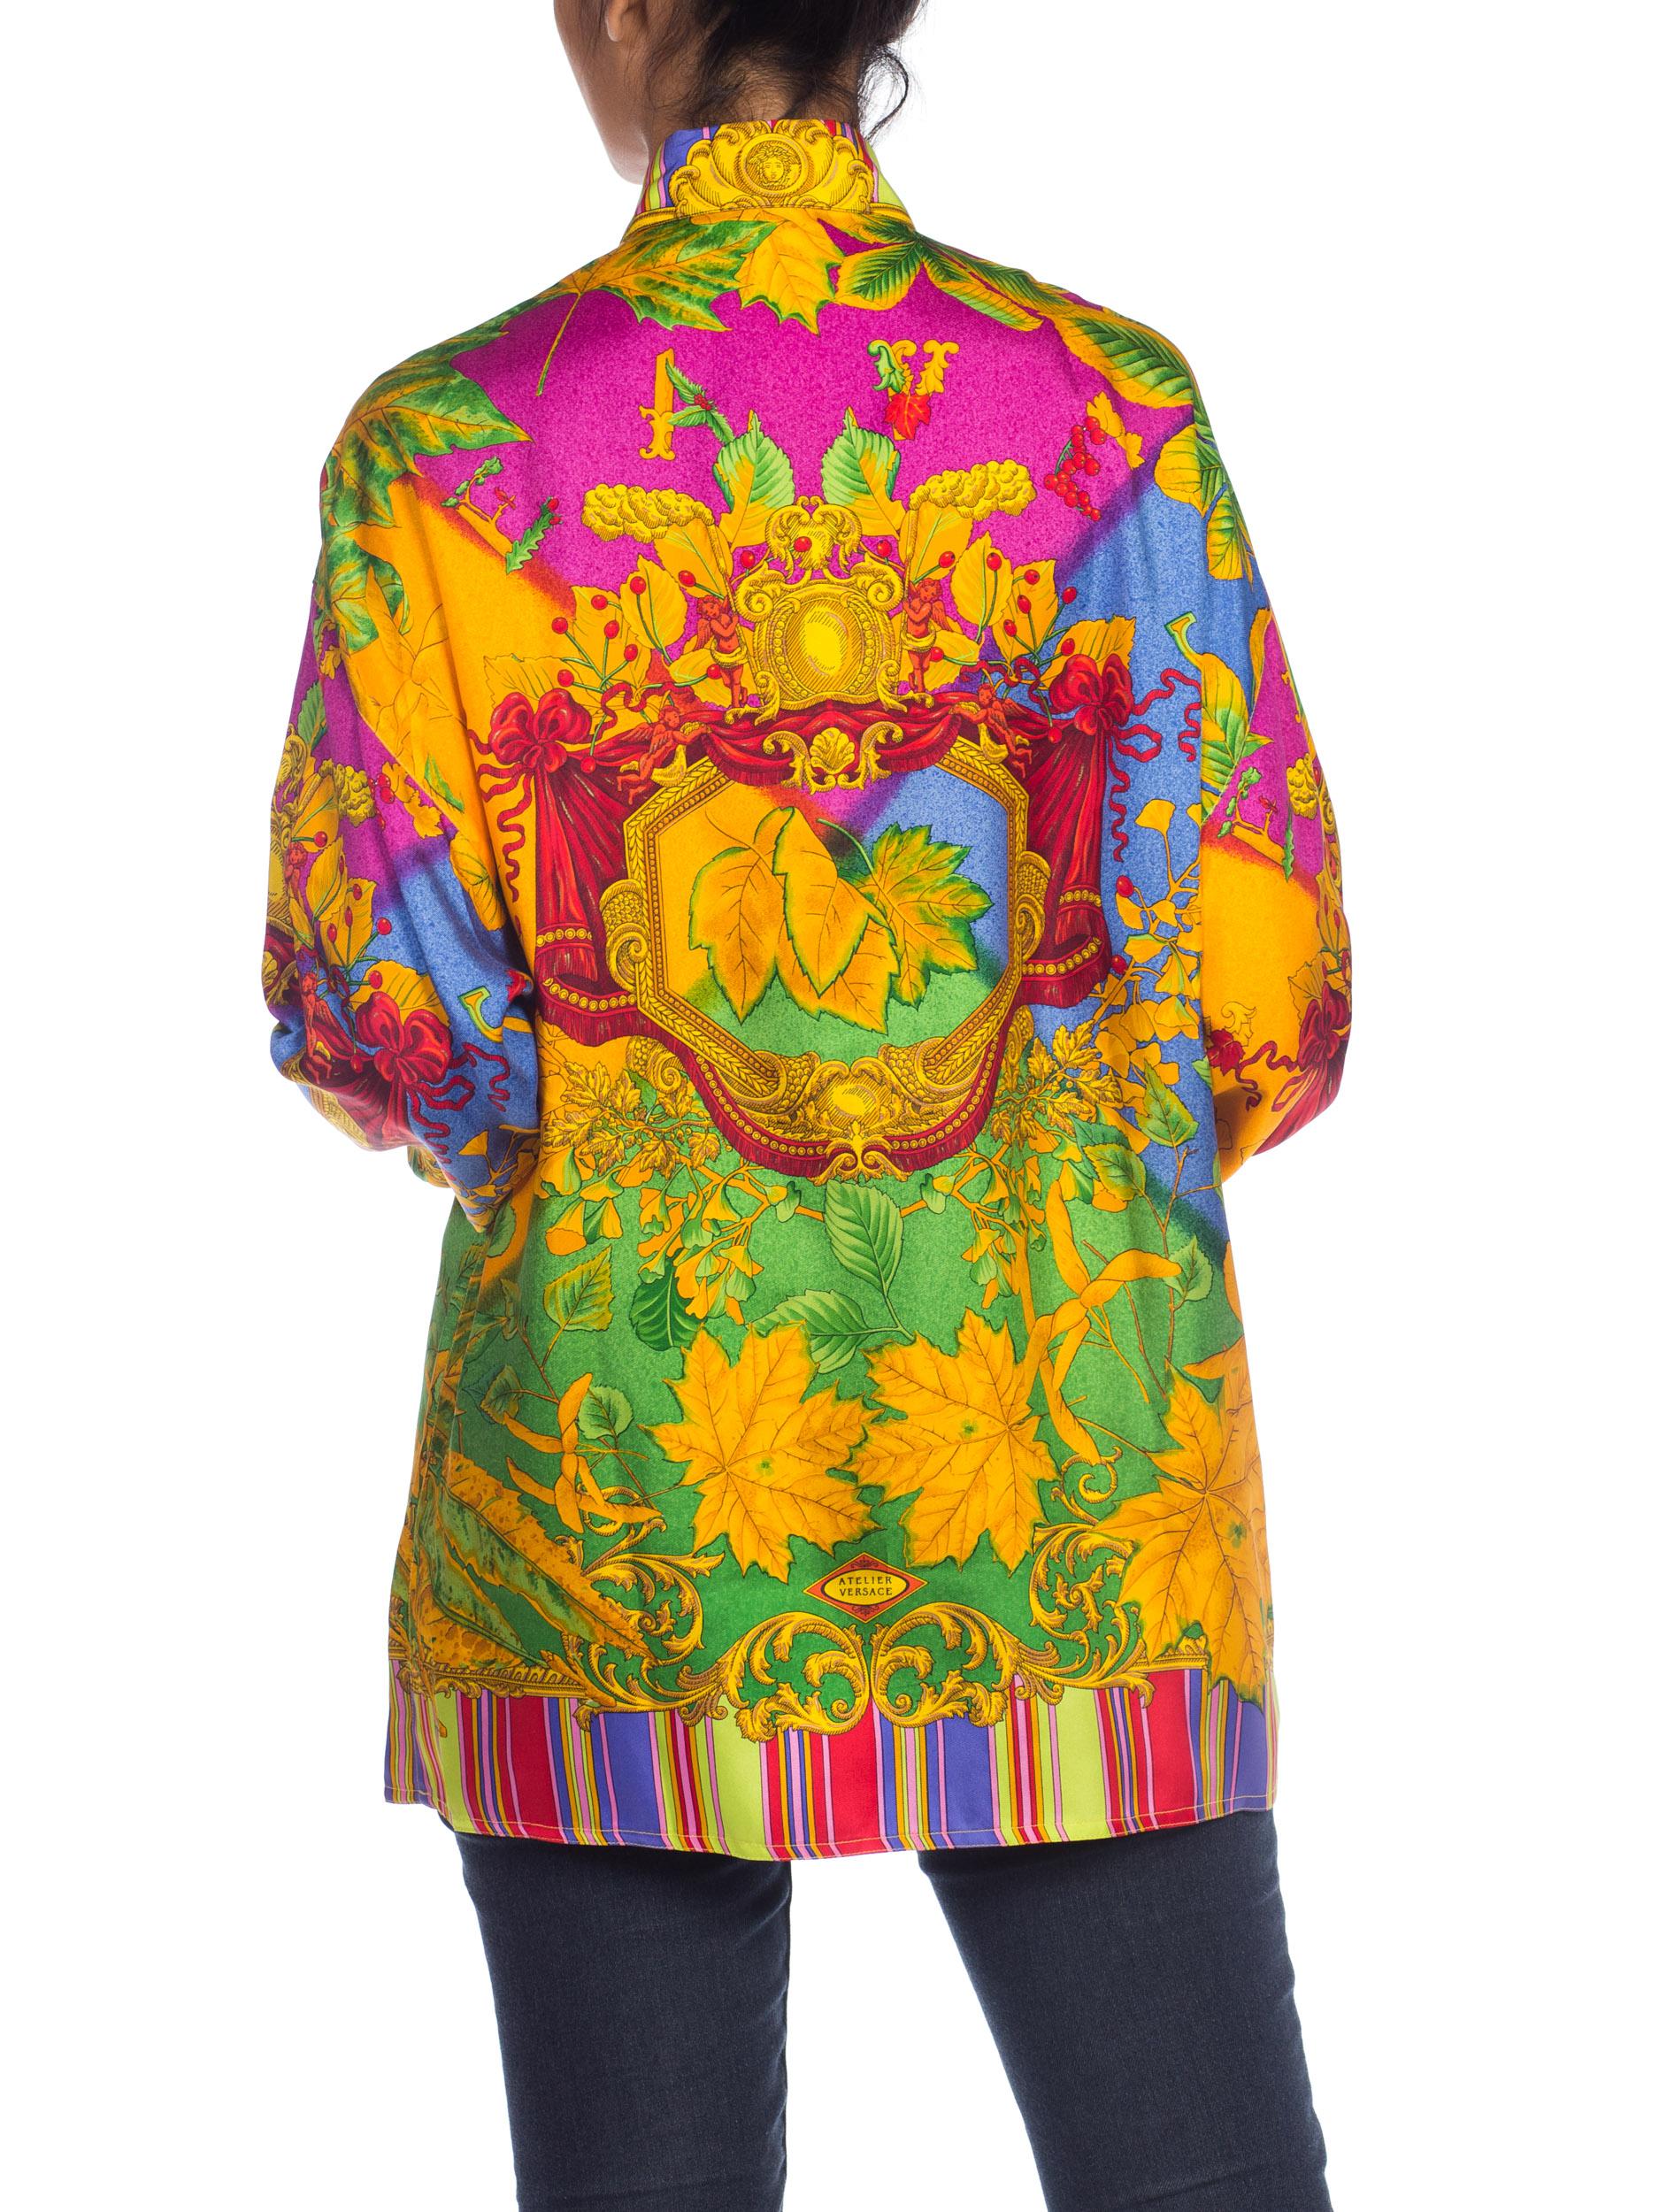 1990S ATELIER GIANNI VERSACE Printed Silk Baroque Leaves Shirt Sz 38 For Sale 1